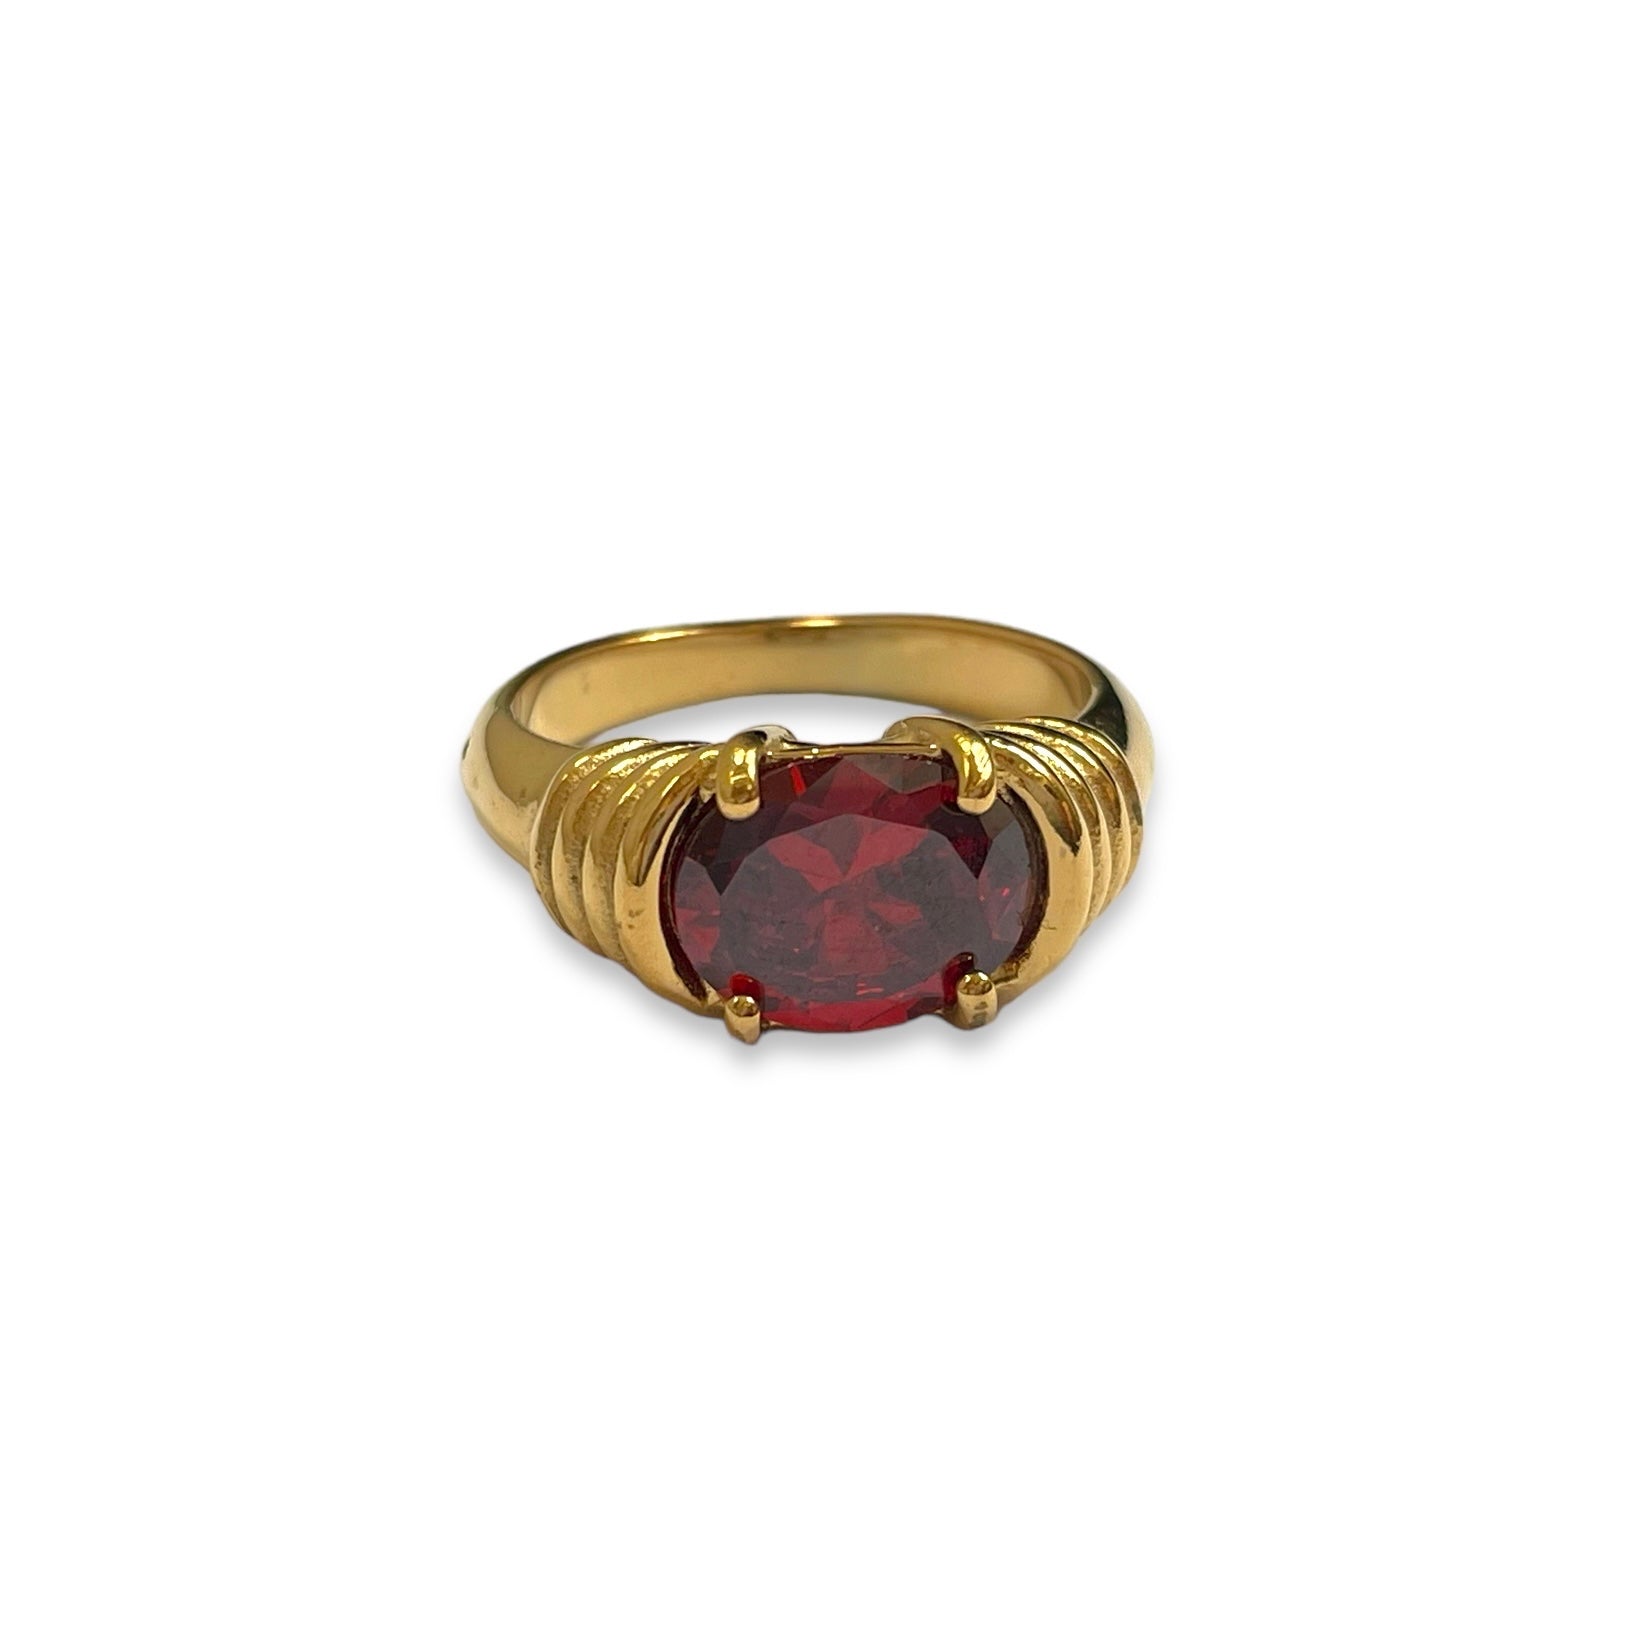 Vintage Style ‘Bella’ Gold Stainless Steel Cubic Zirconia Ring